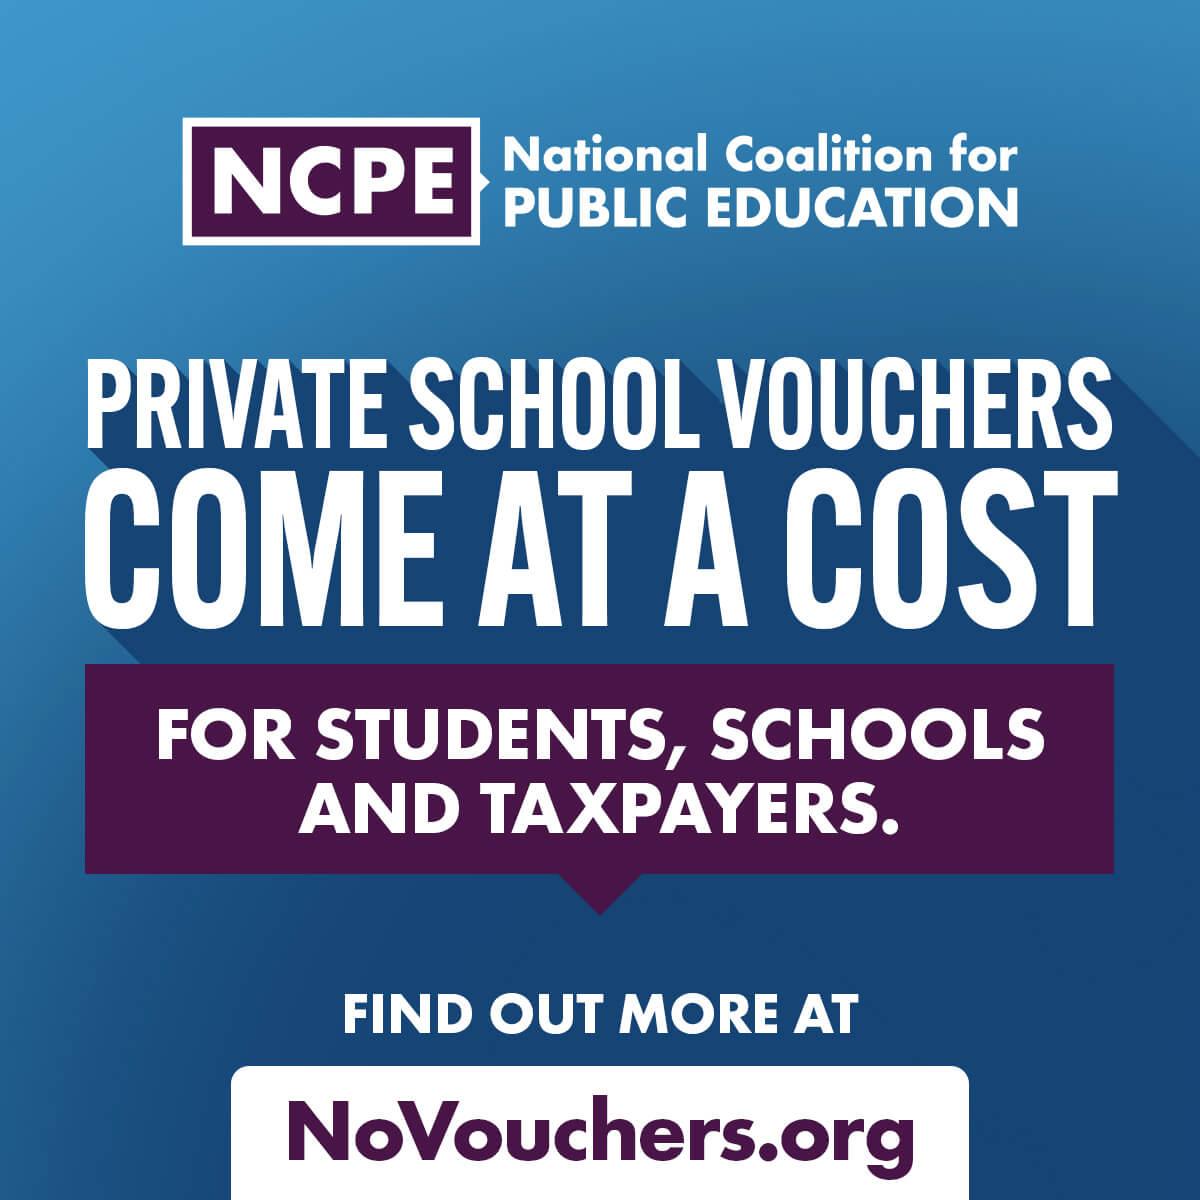 Private school vouchers come at a cost for students, schools, and taxpayers